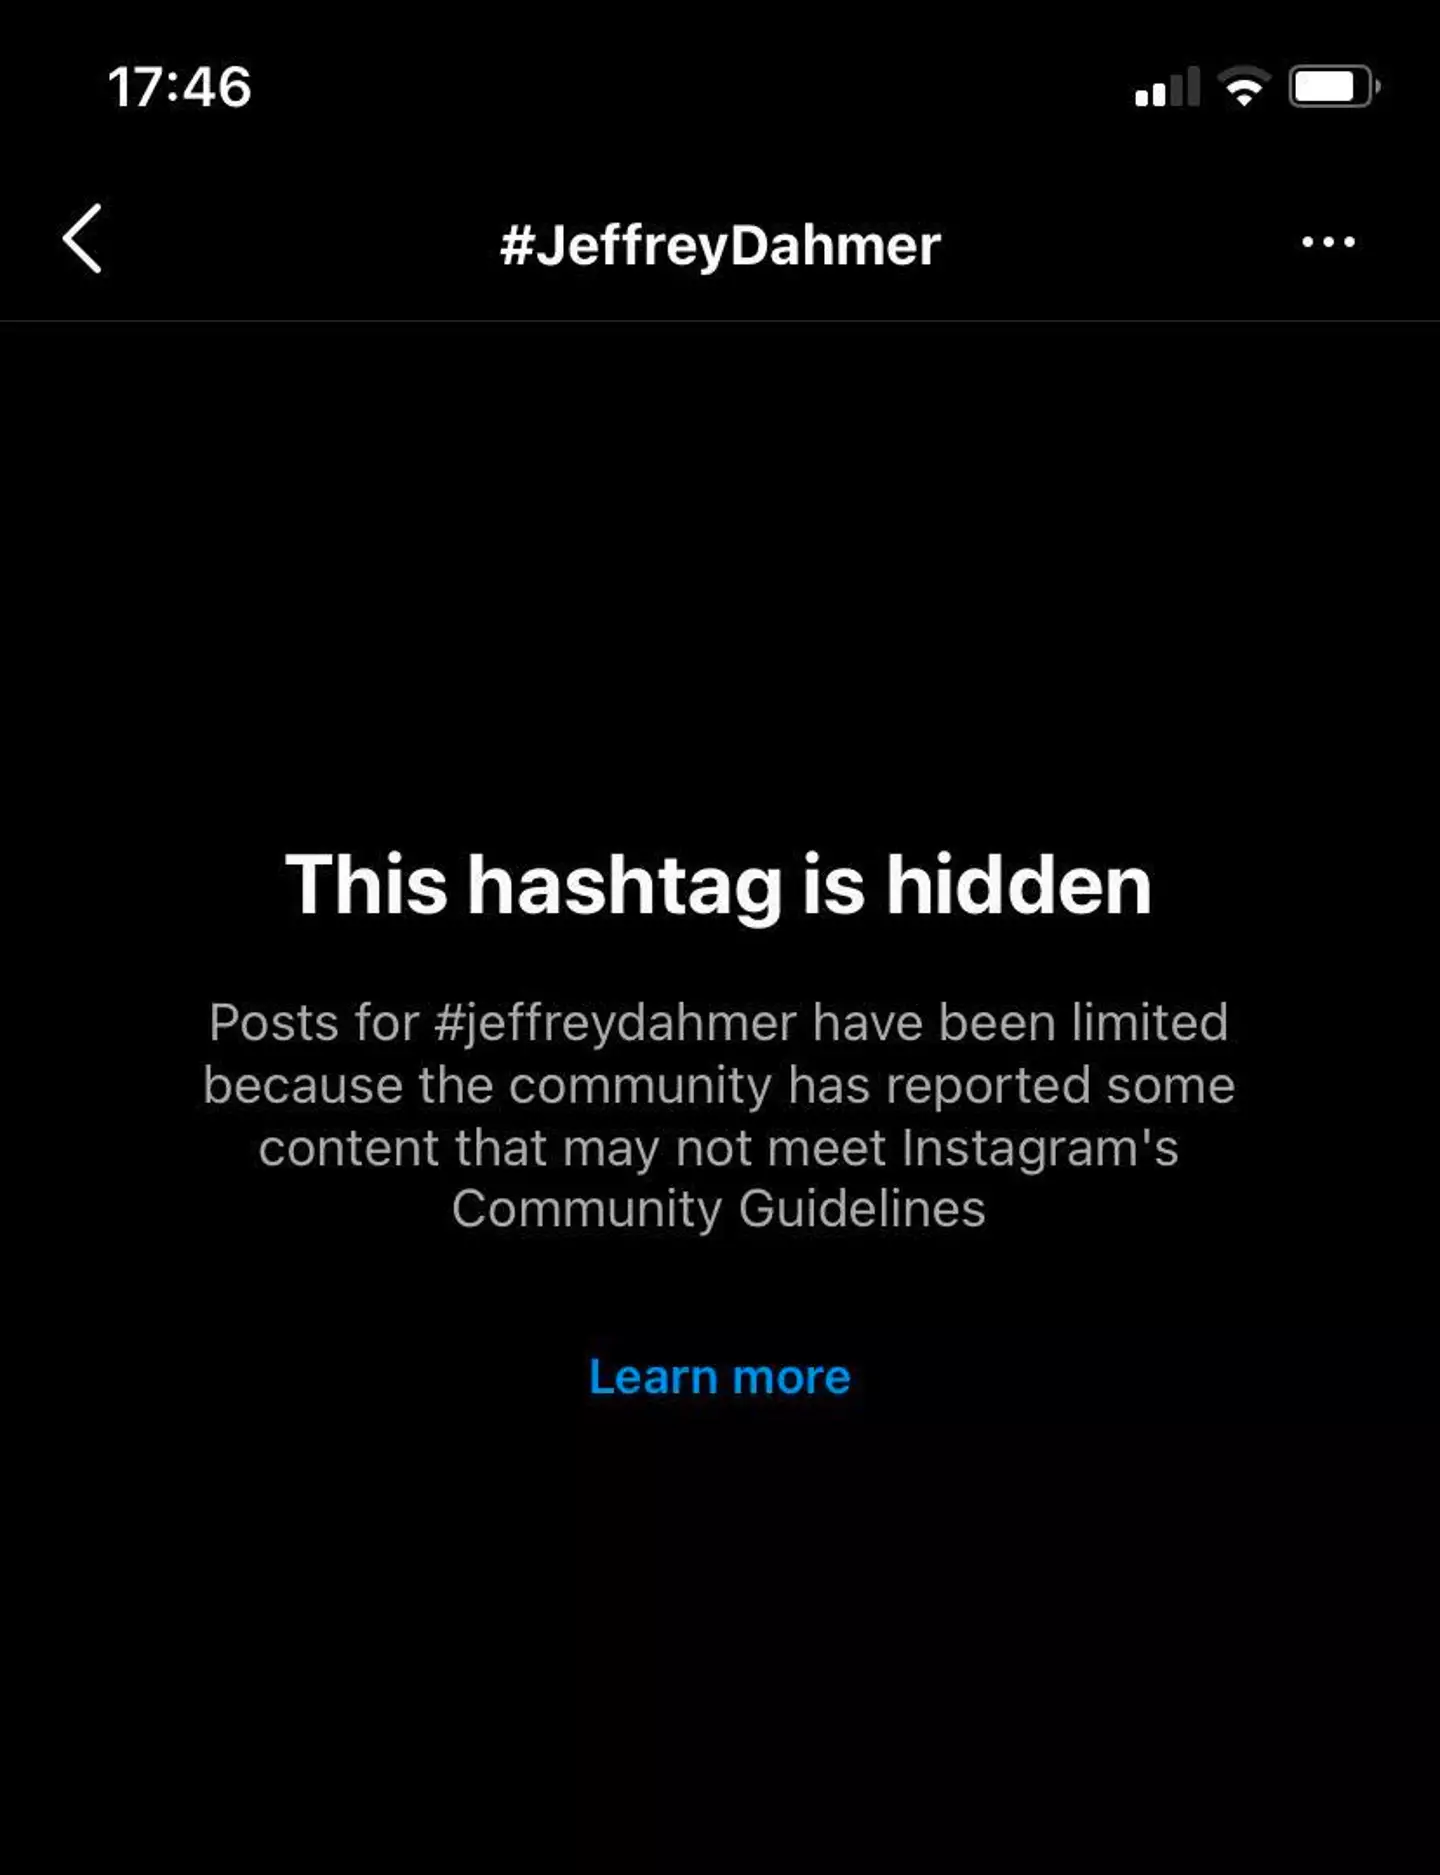 It's a no for anyone searching #jeffreydahmer on Instagram.